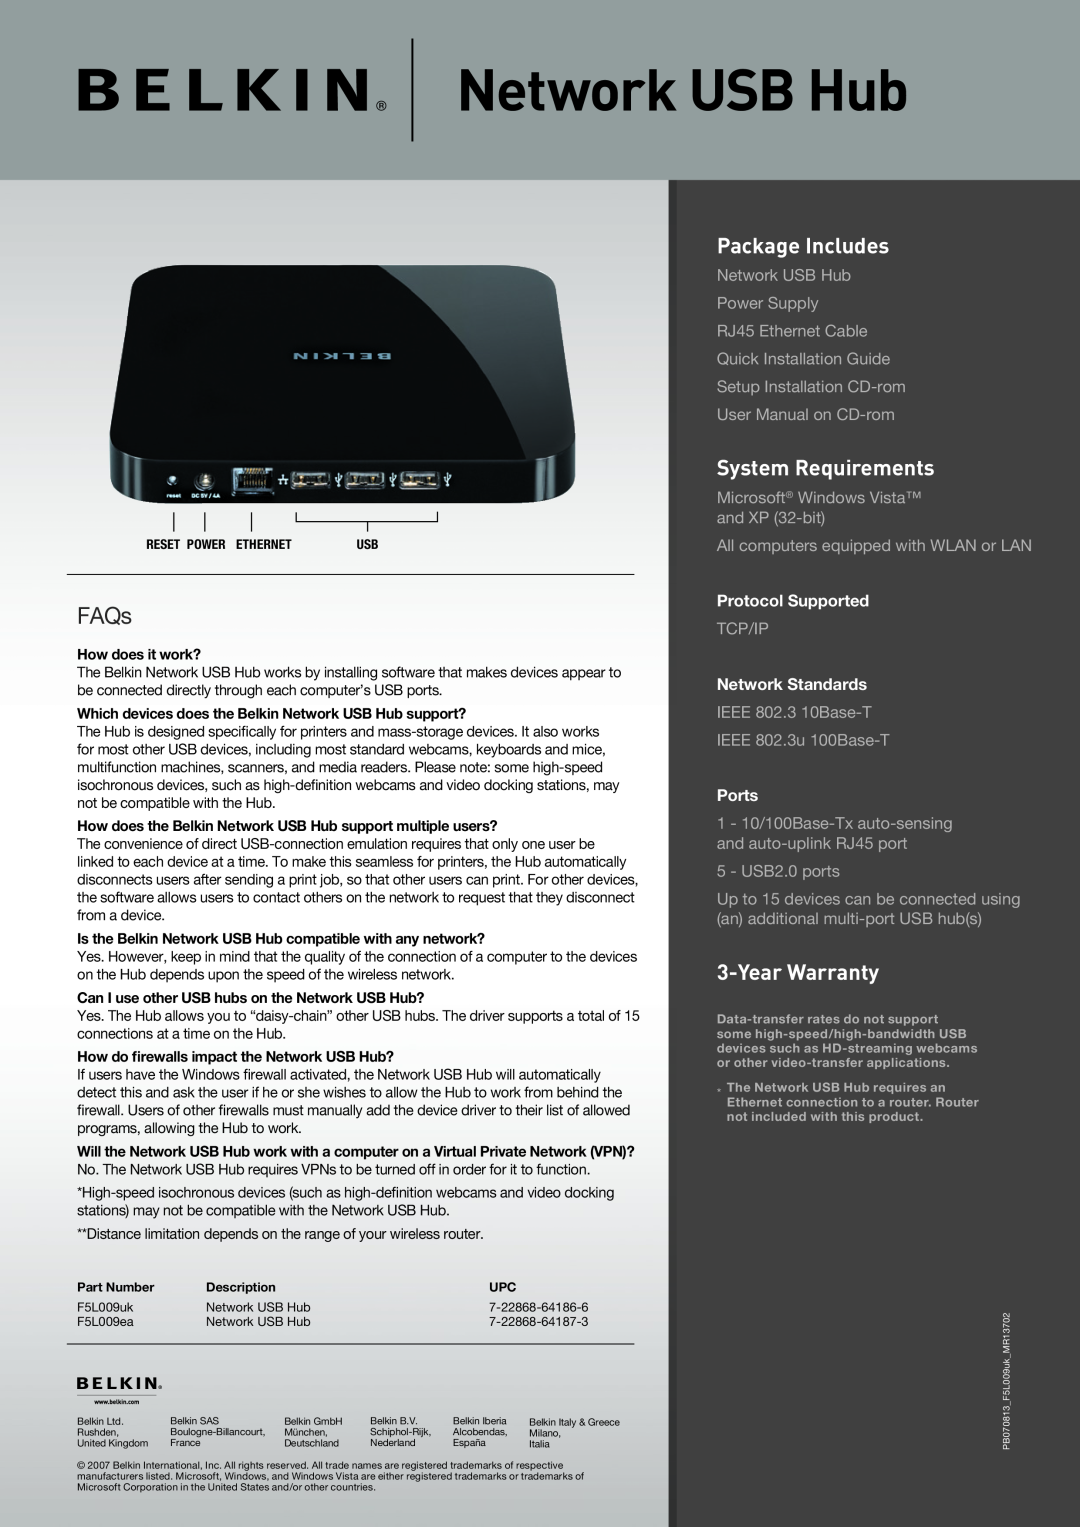 Belkin F5L009 Protocol Supported, Network Standards, Ports, Network USB Hub, FAQs, Package Includes, System Requirements 